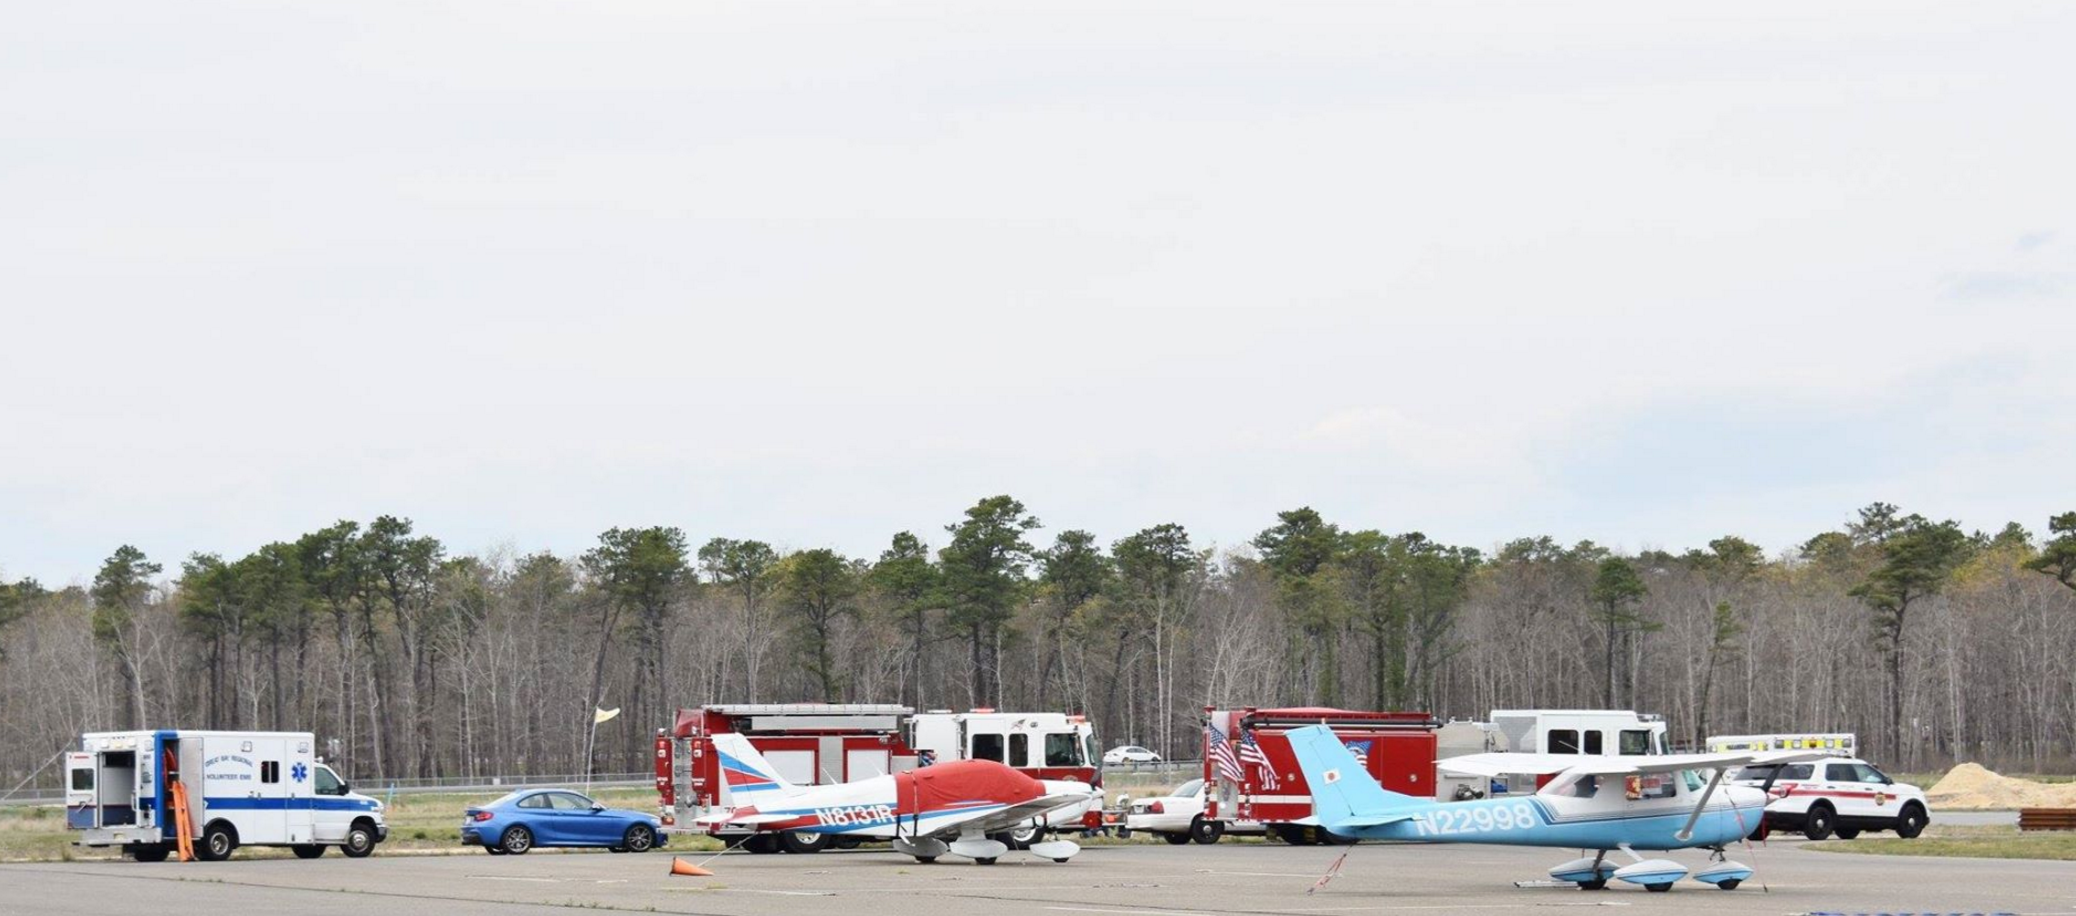 The emergency response early this afternoon at the Eagles Nest Airport in Eagleswood. (Photo: JSHN contributor Roman Isaryk)